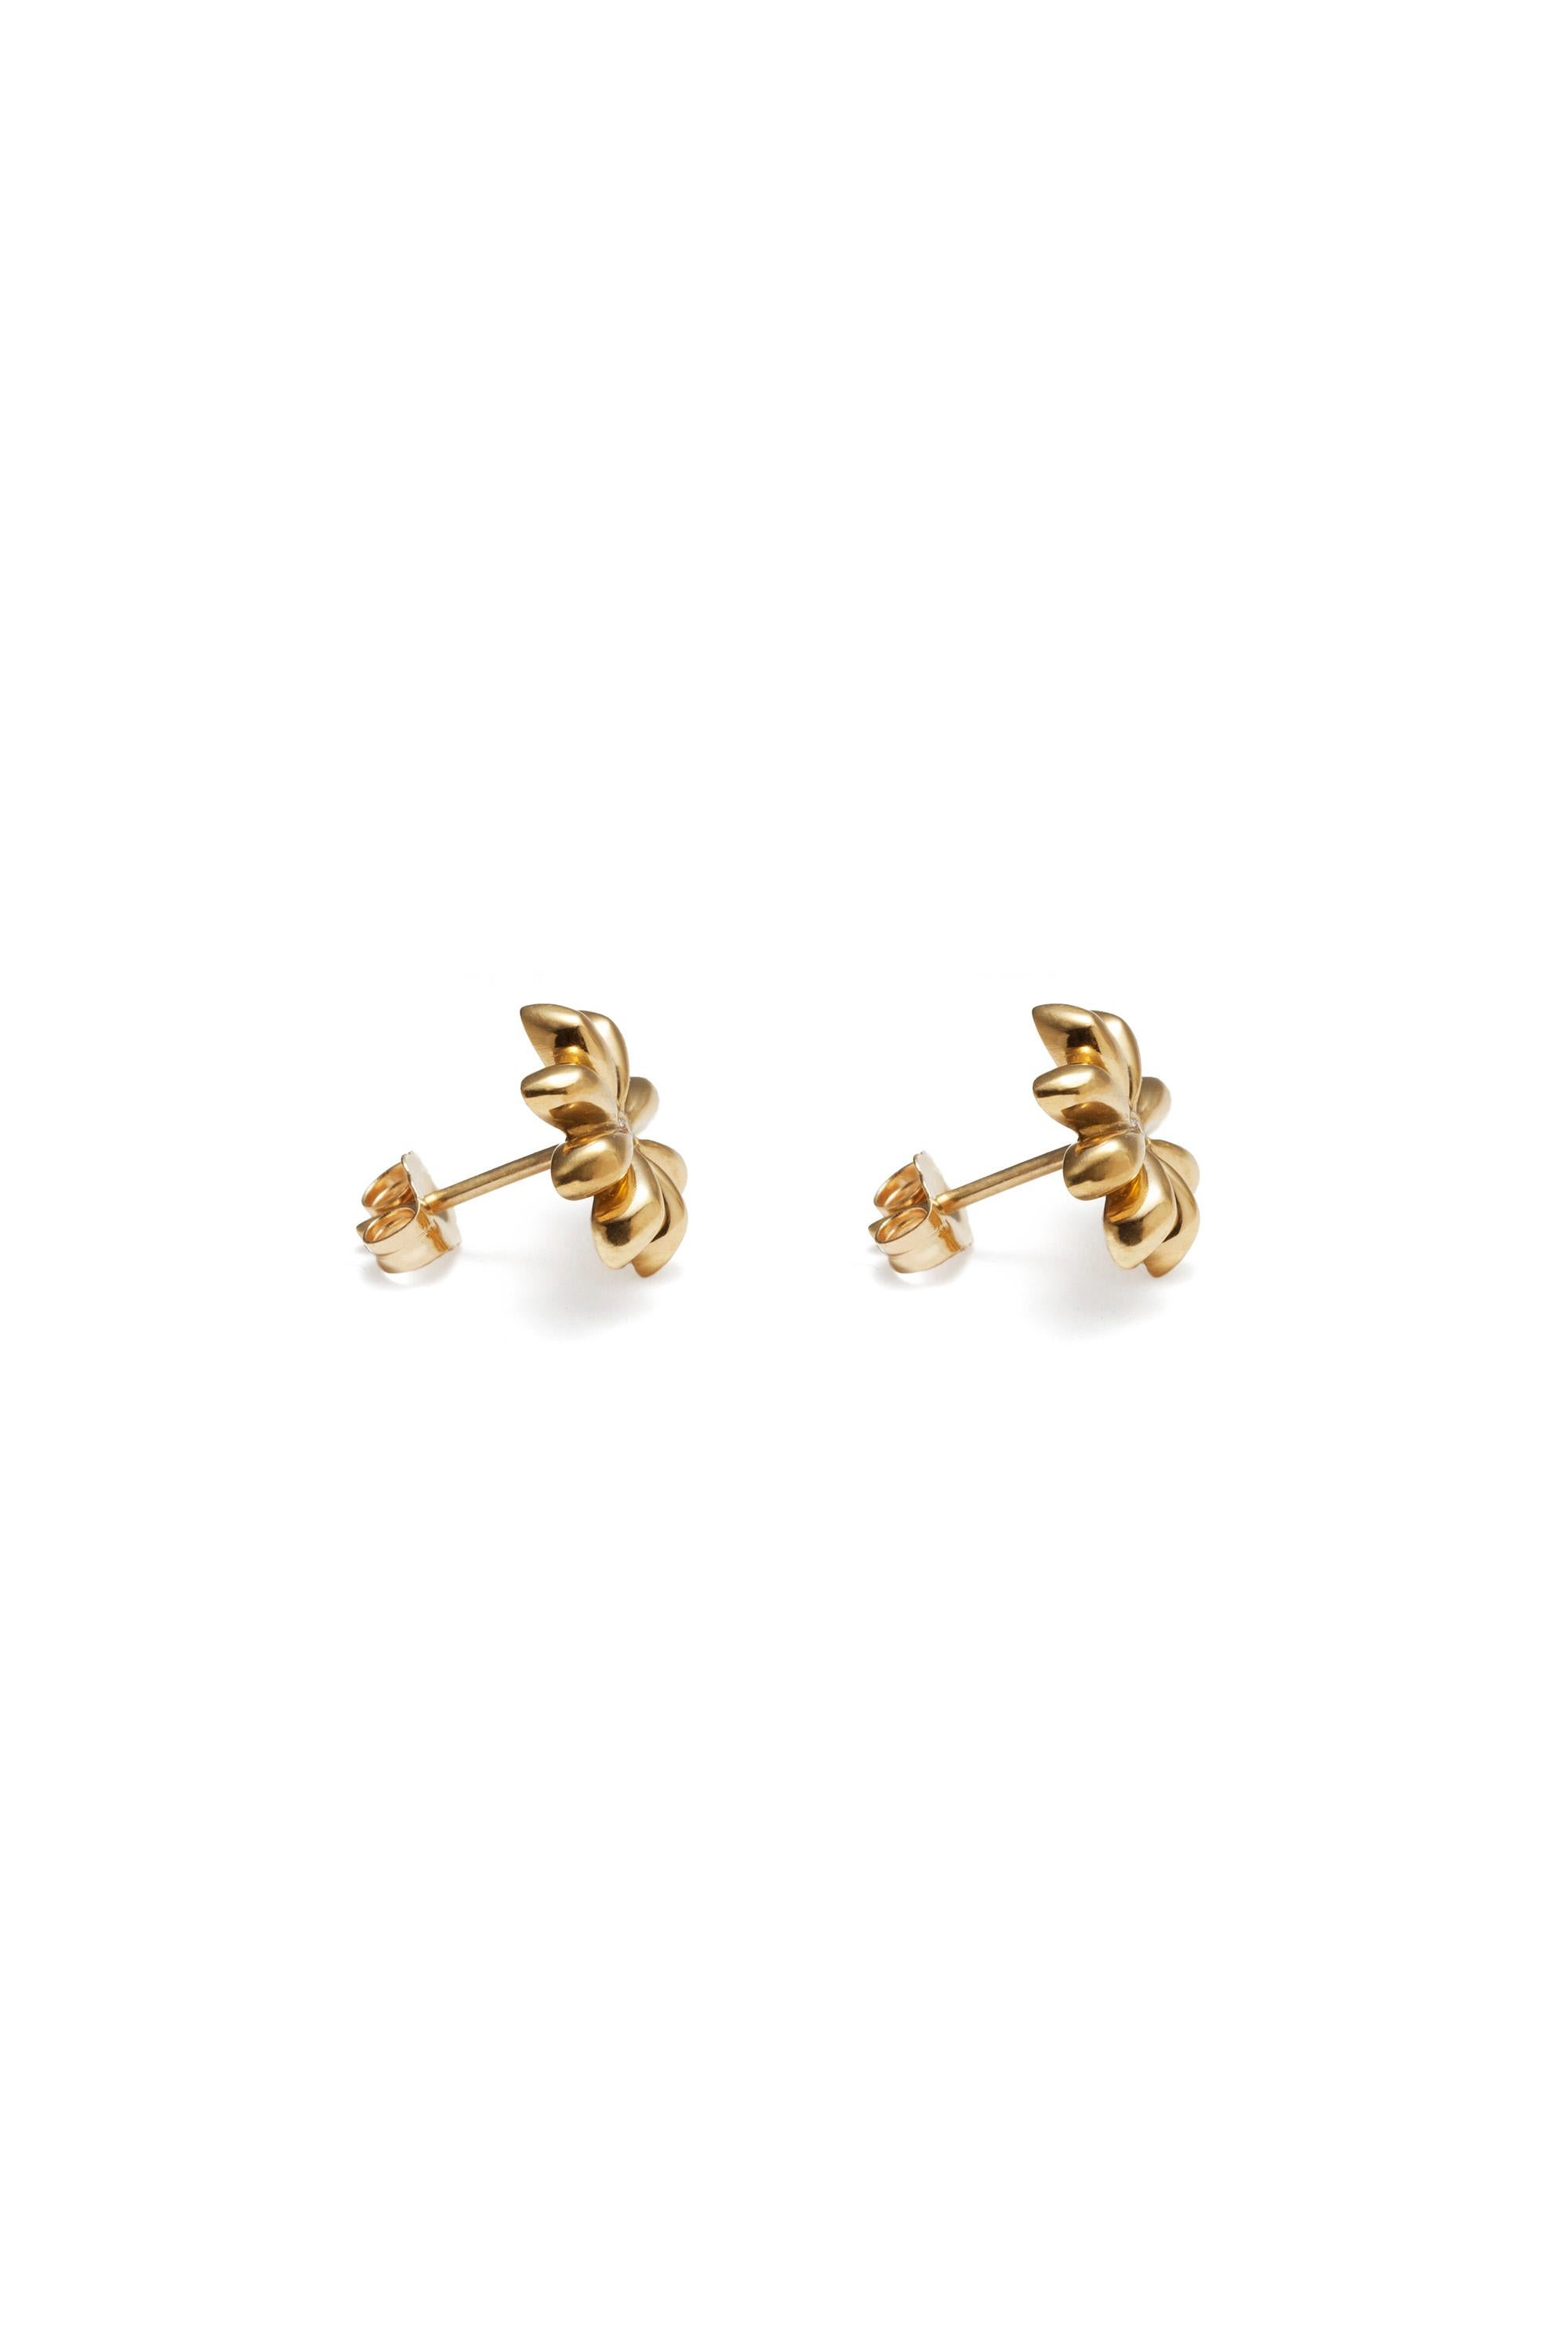 Artisan Star Anise Earrings with Diamond Centers in 22 Karat Gold For Sale